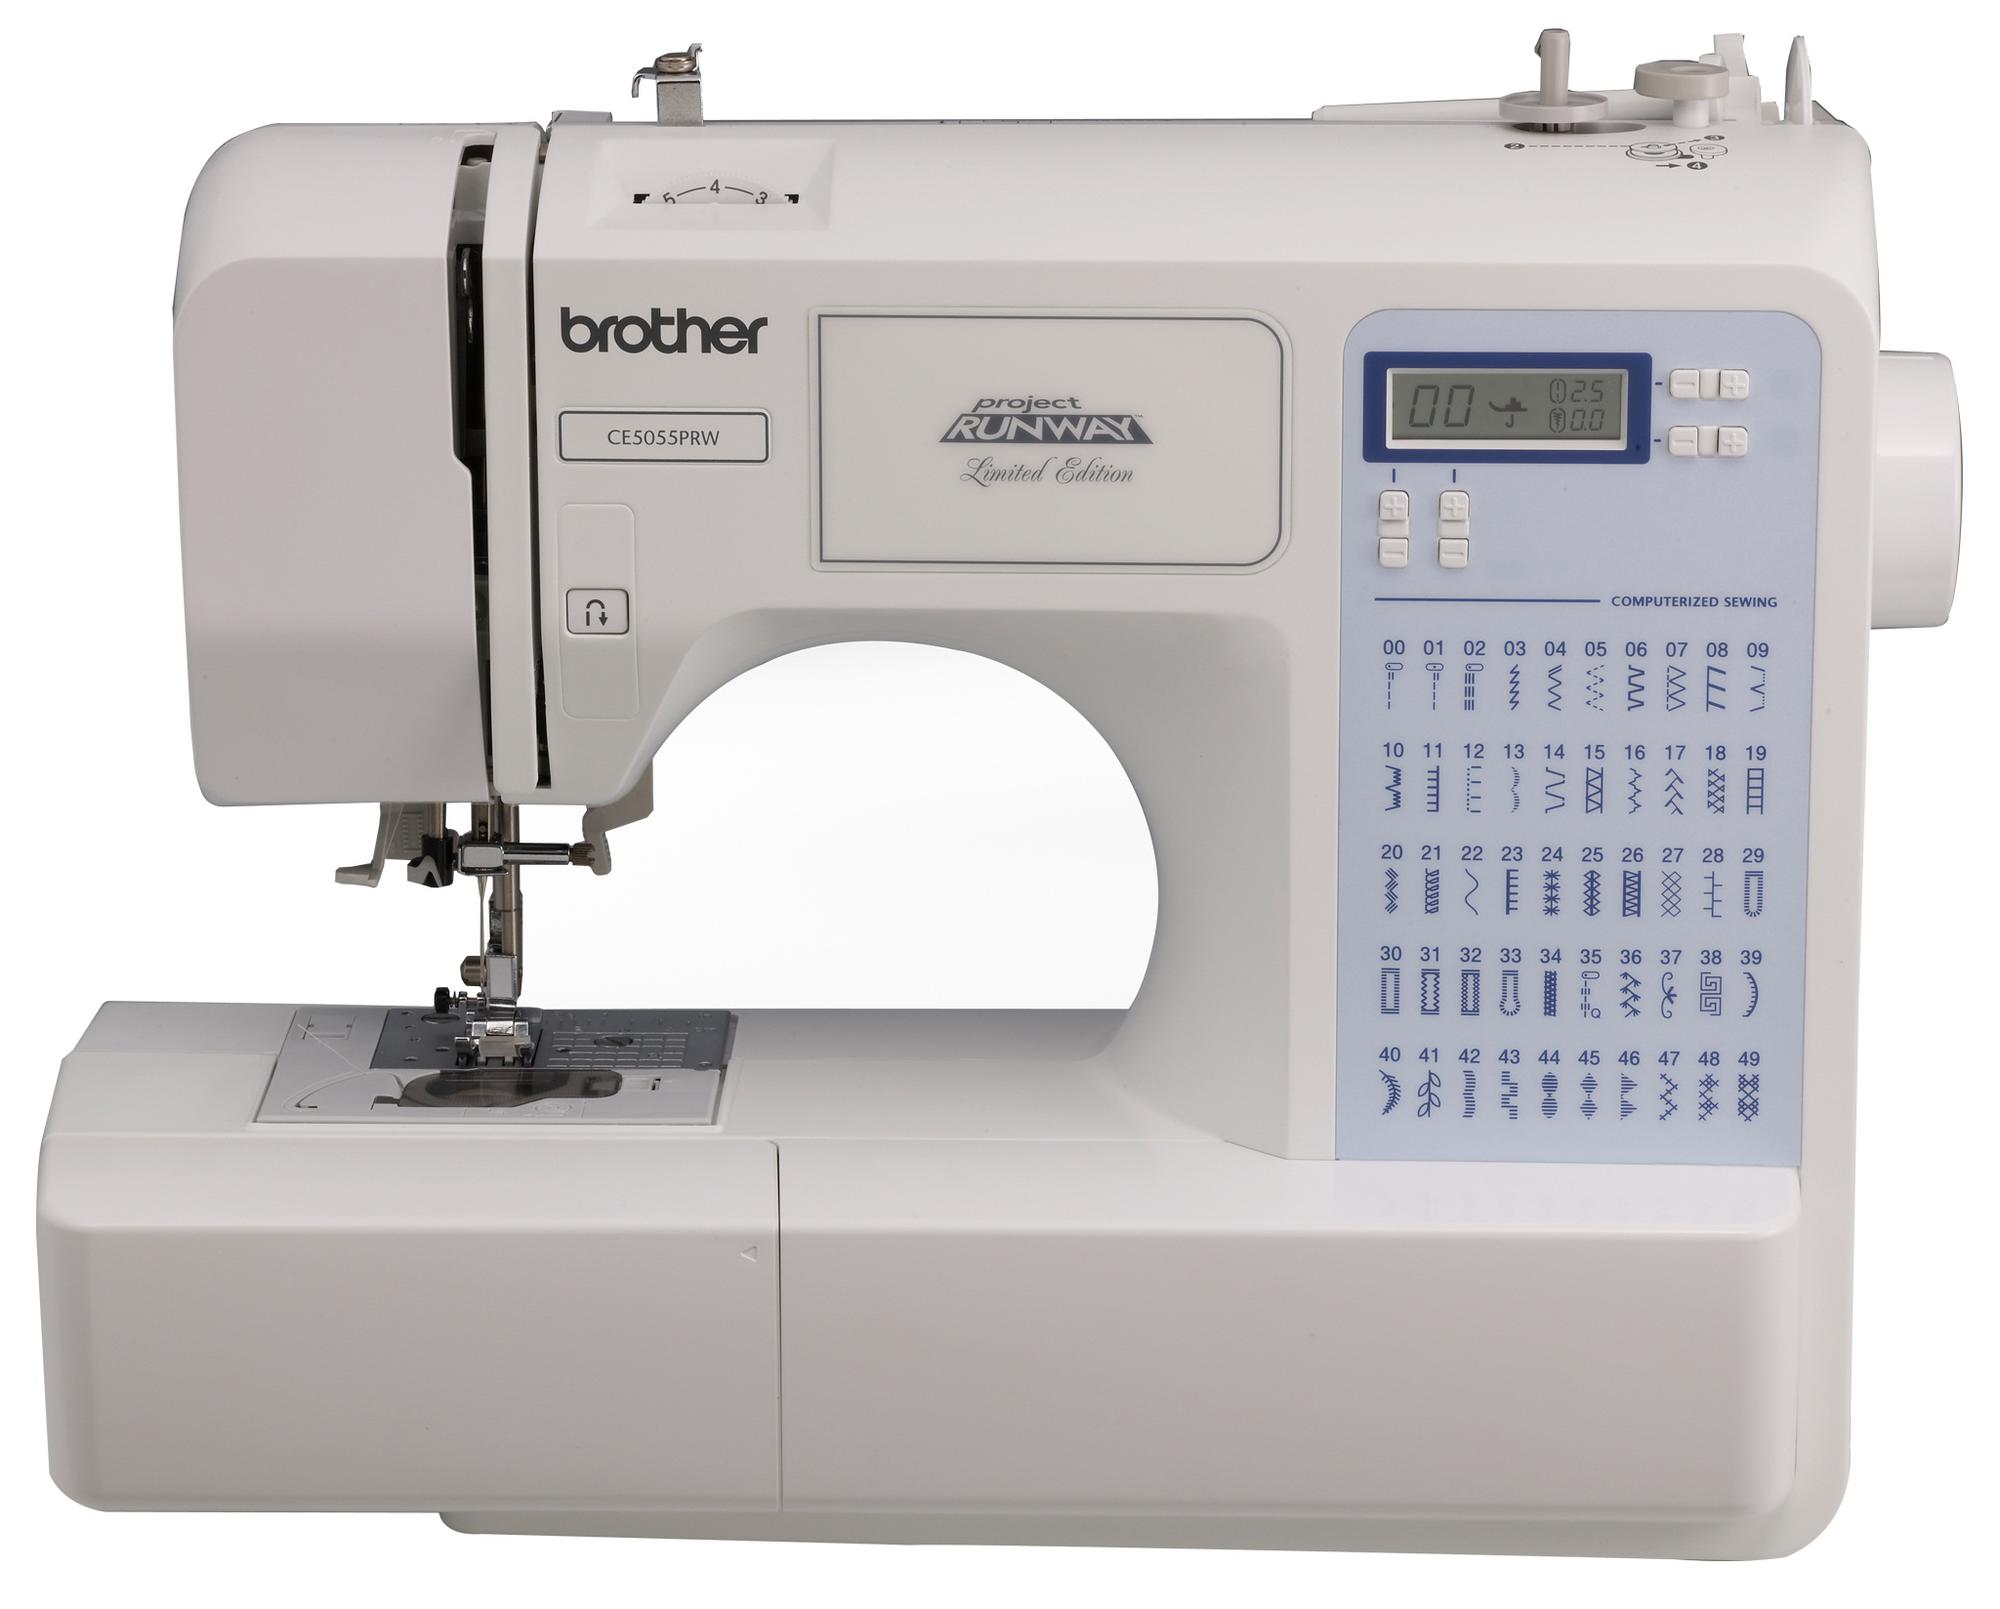 brother project runway sewing machine hs 2000